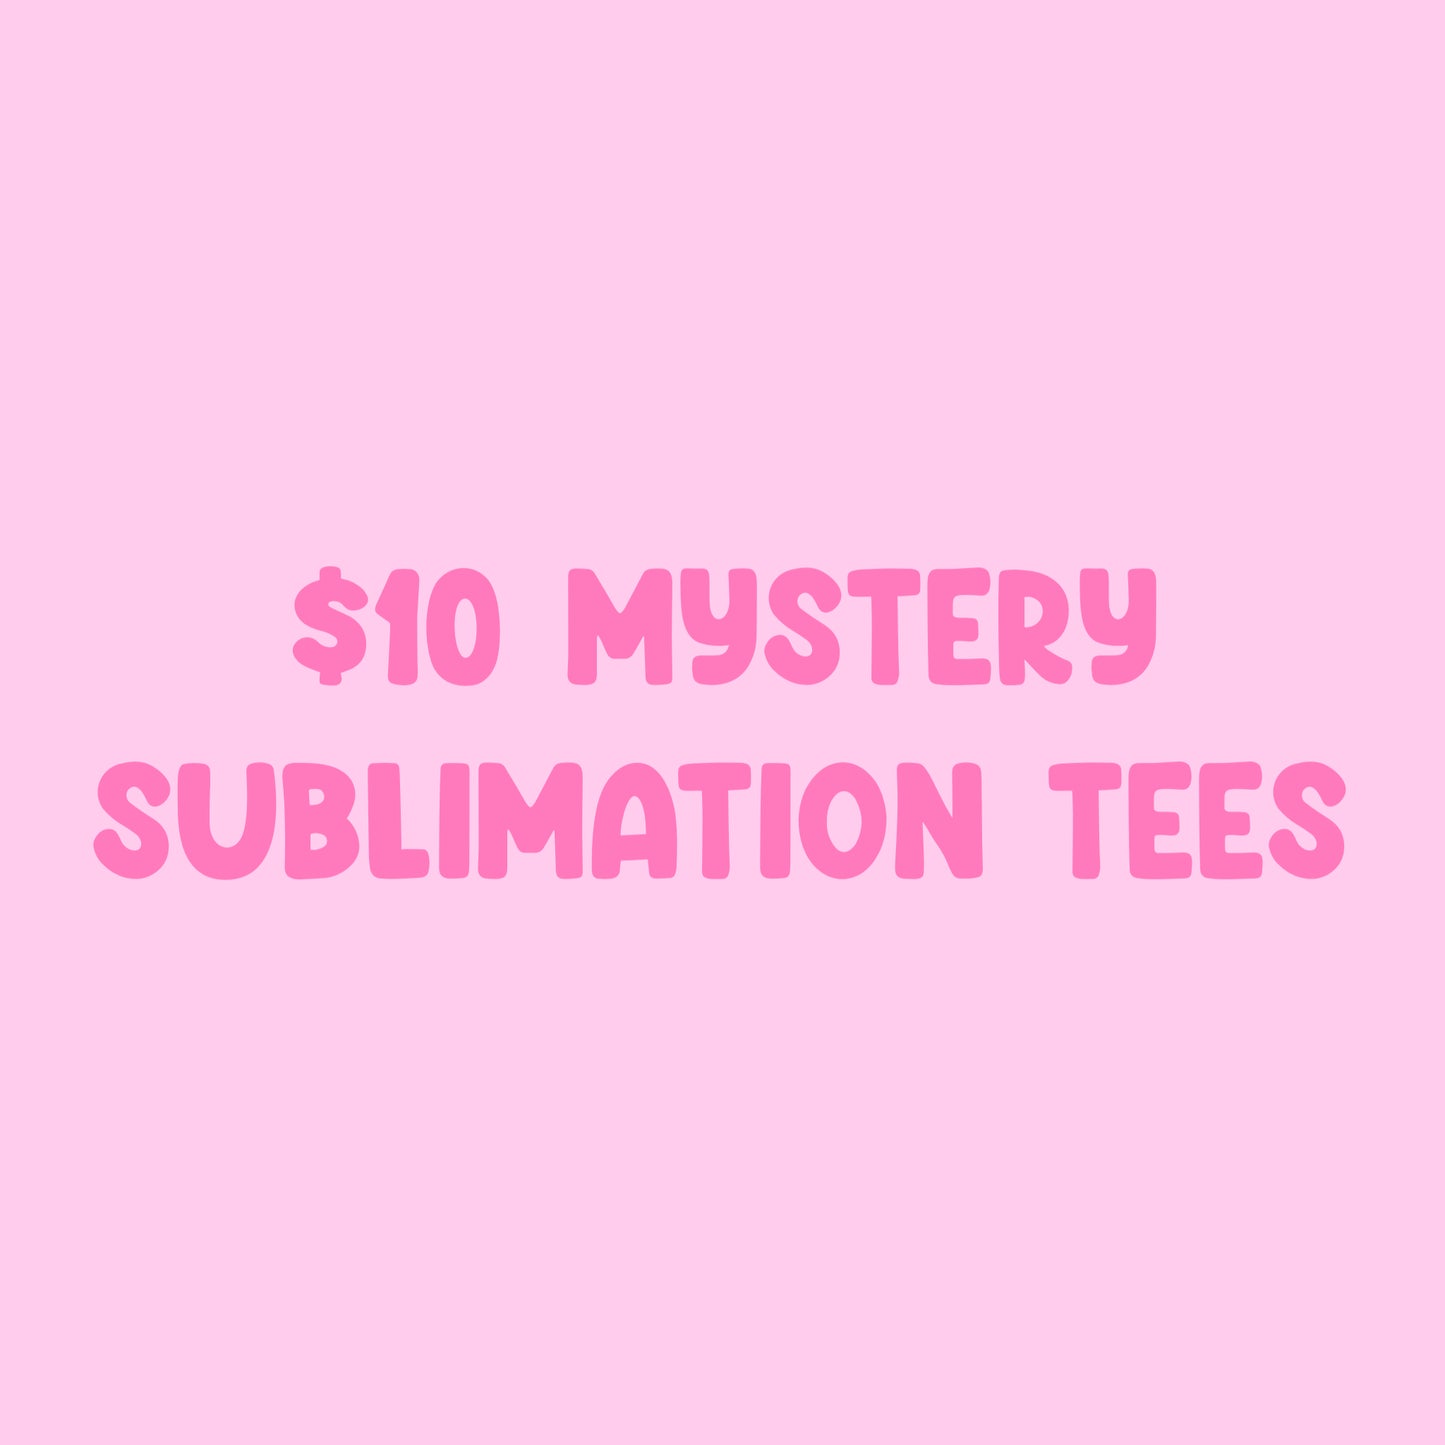 mystery sublimation tees